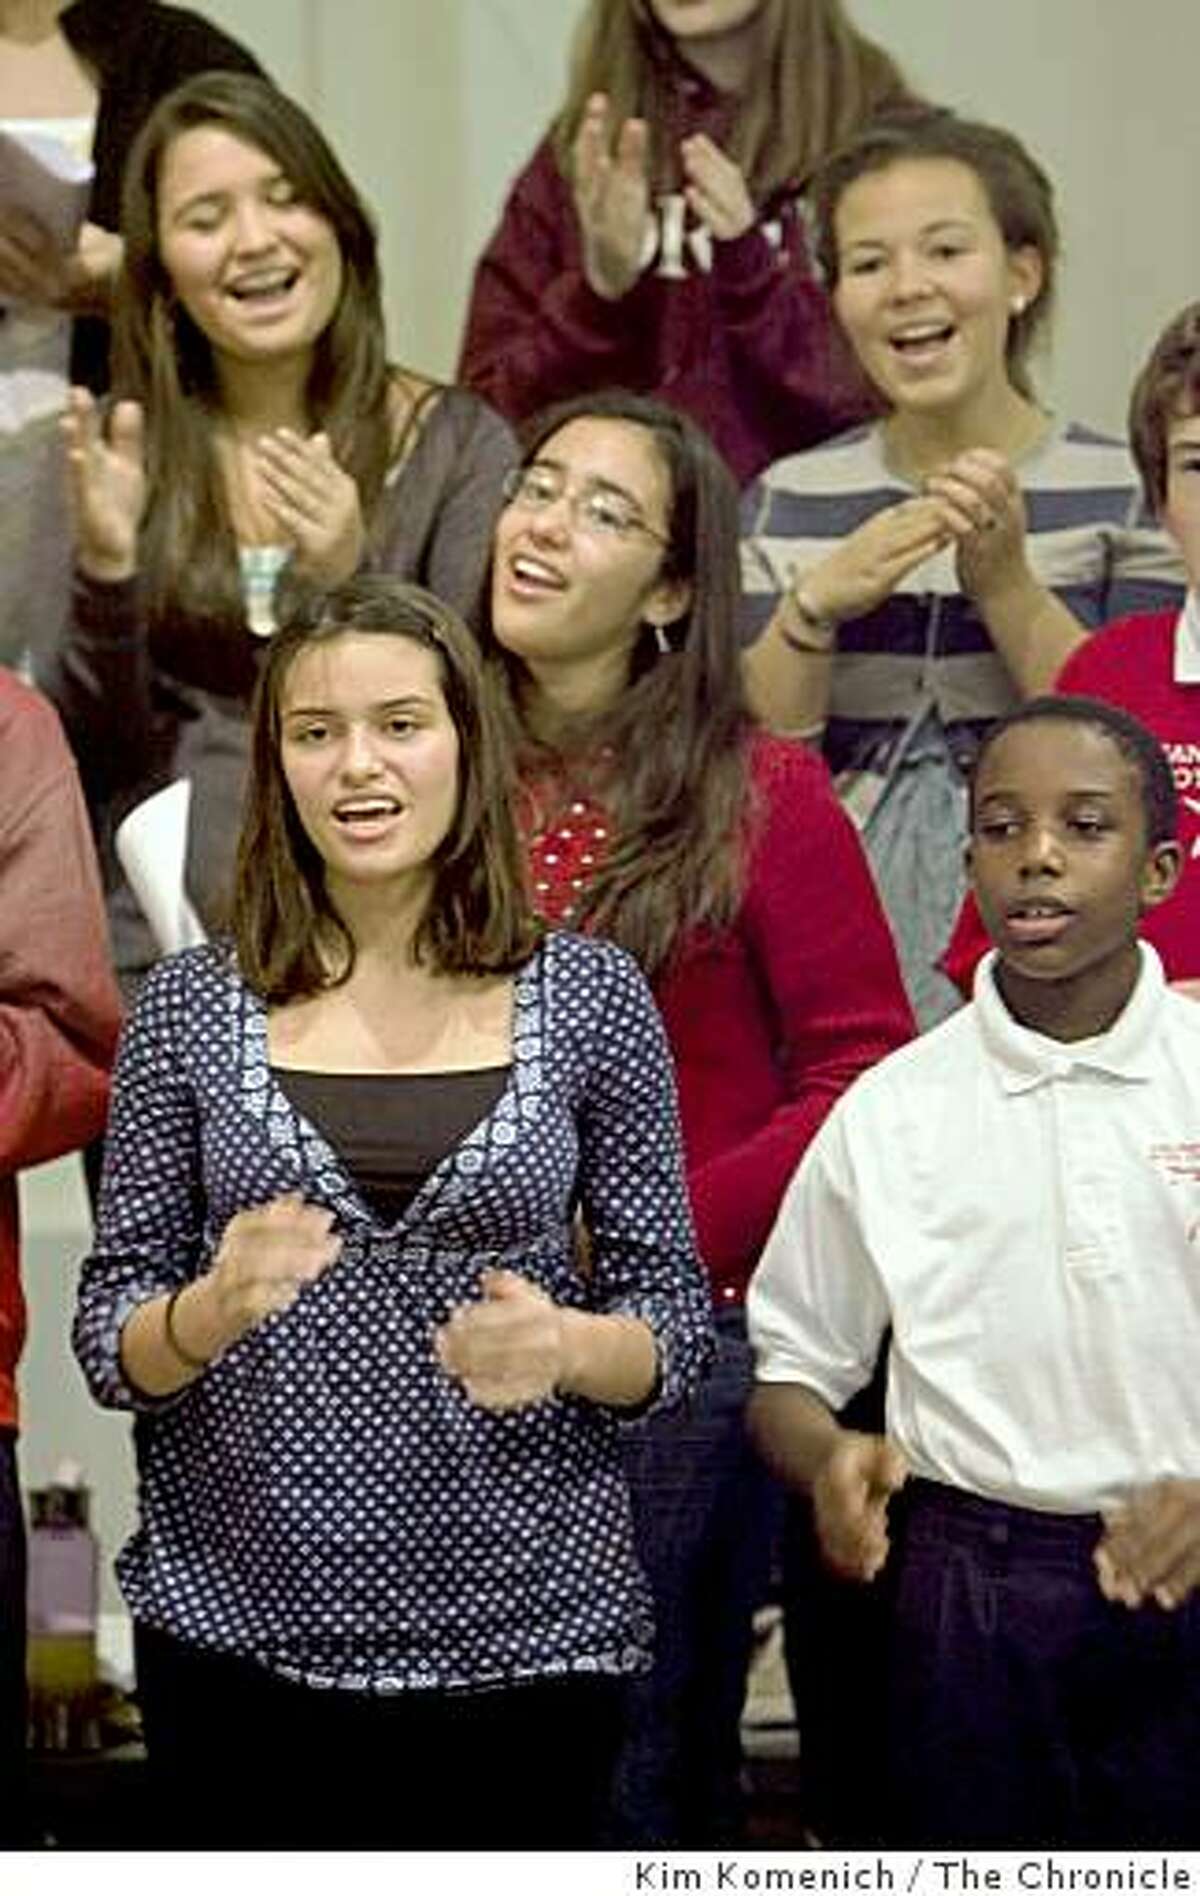 Members of the San Francisco Boys Chorus and the San Francisco Girls Chorus sing "Give Us Hope" in San Francisco, Calif., on Friday, Jan. 9, 2009 as they practice the songs they'll sing during the Jan. 20 inaugural ceremony for President-elect Barack Obama.